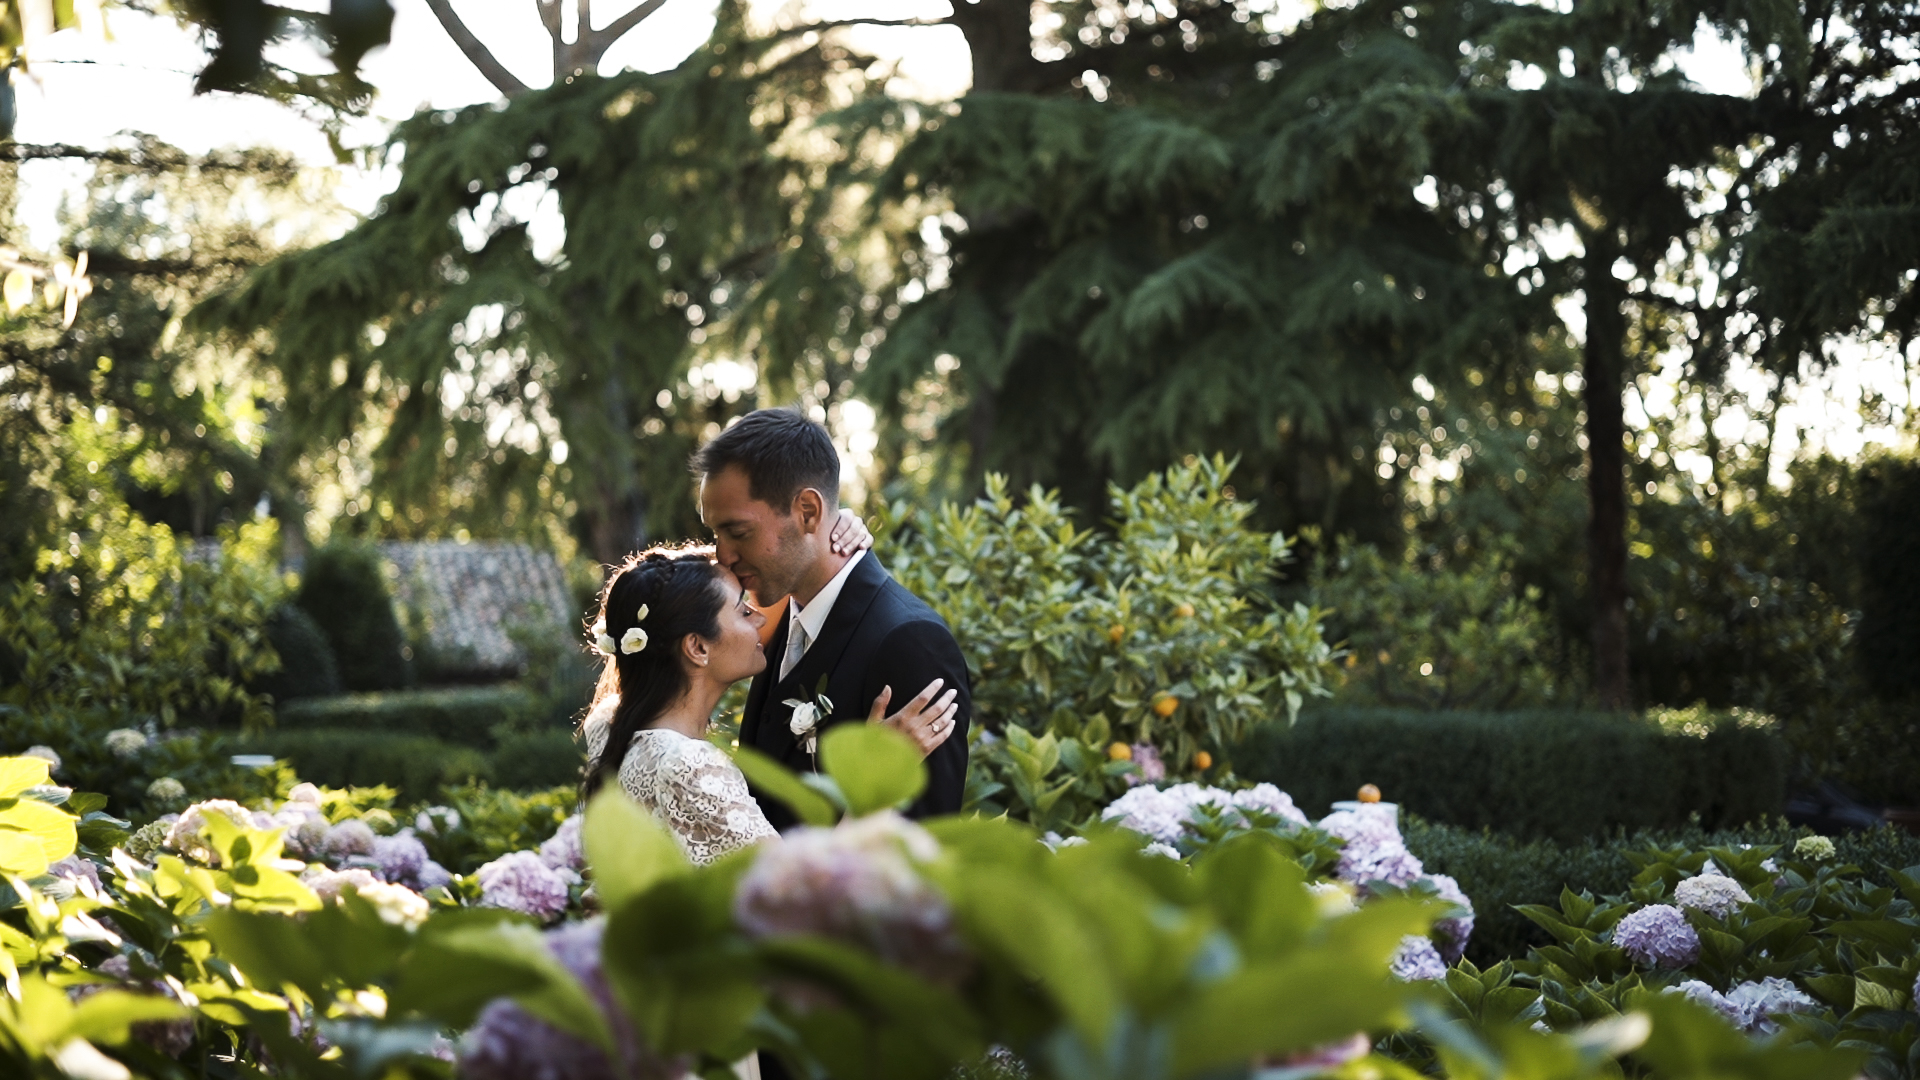 A beautiful wedding in Le Marche, Italy